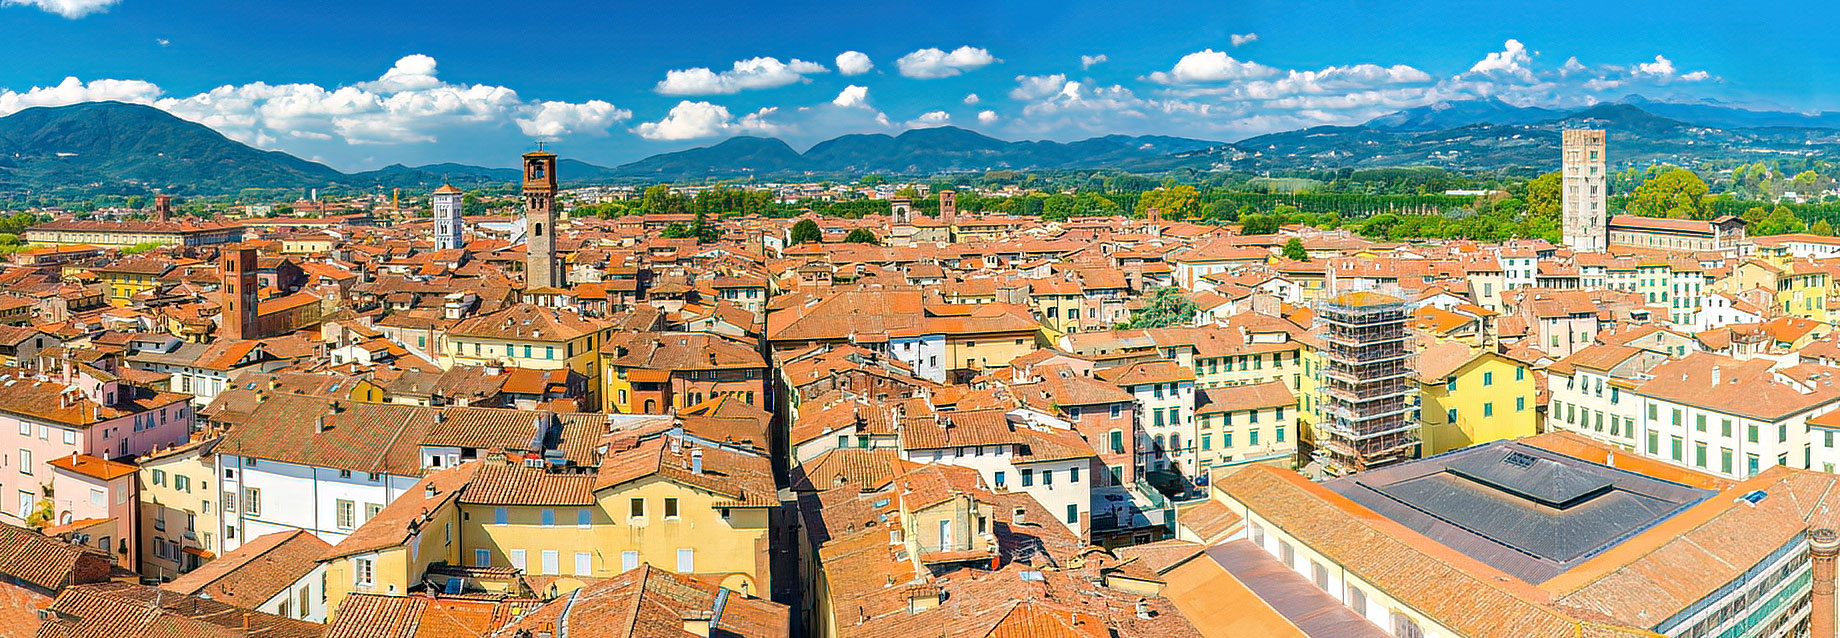 Panoramic View from Inside the Historical Centre of Lucca, Tuscany, Italy